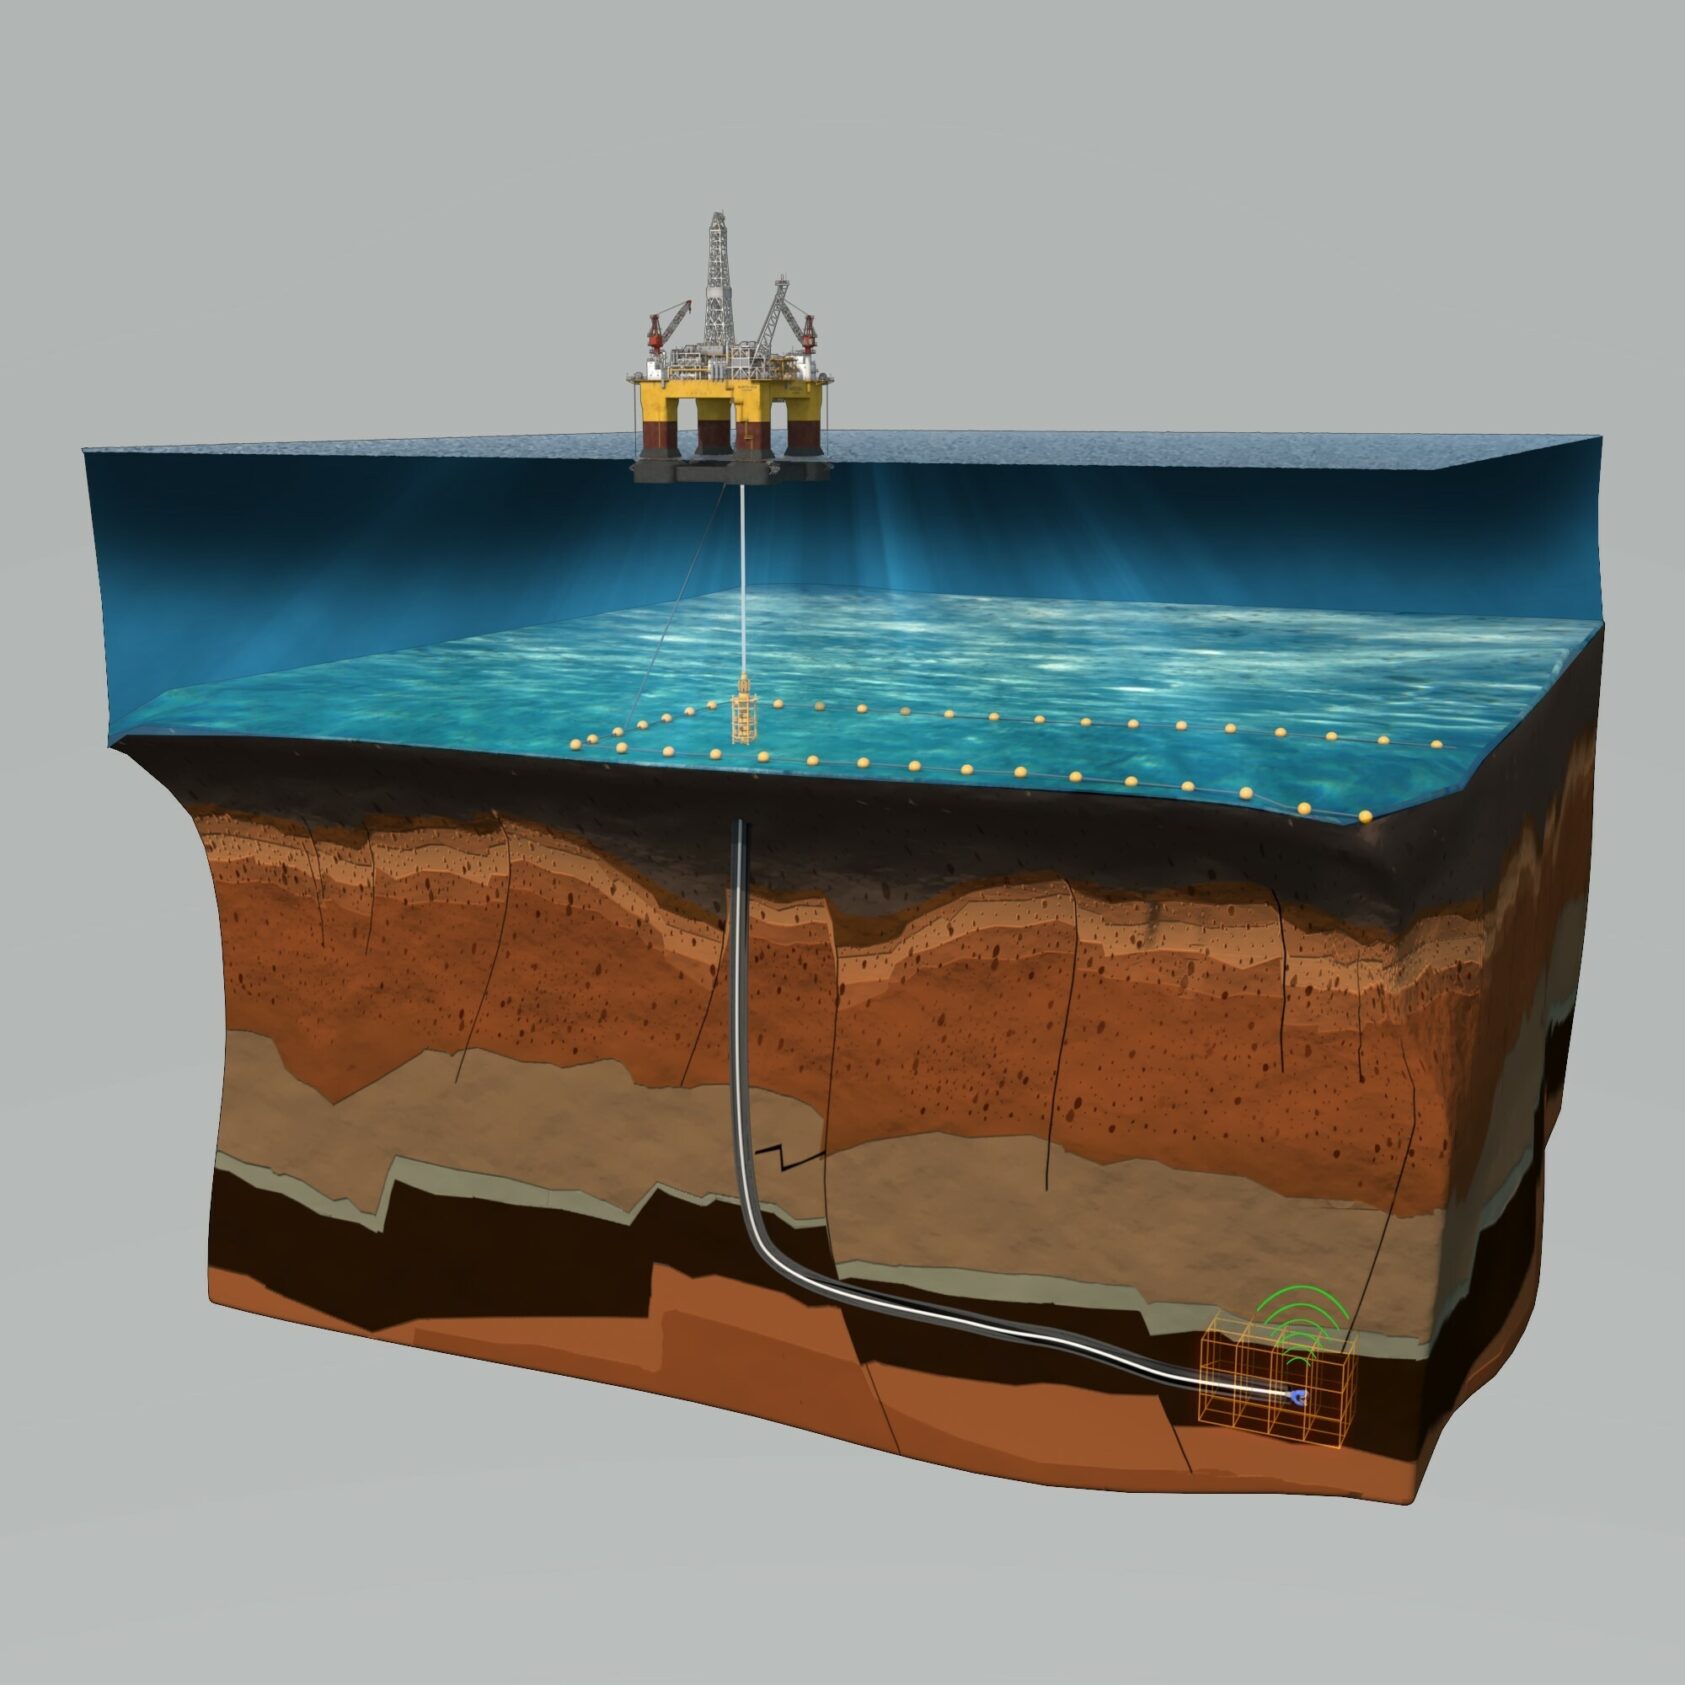 Monviro/Octio, , Horisontal 2, , Illustration - offshore plattform with a string into the the seabed -cross section view